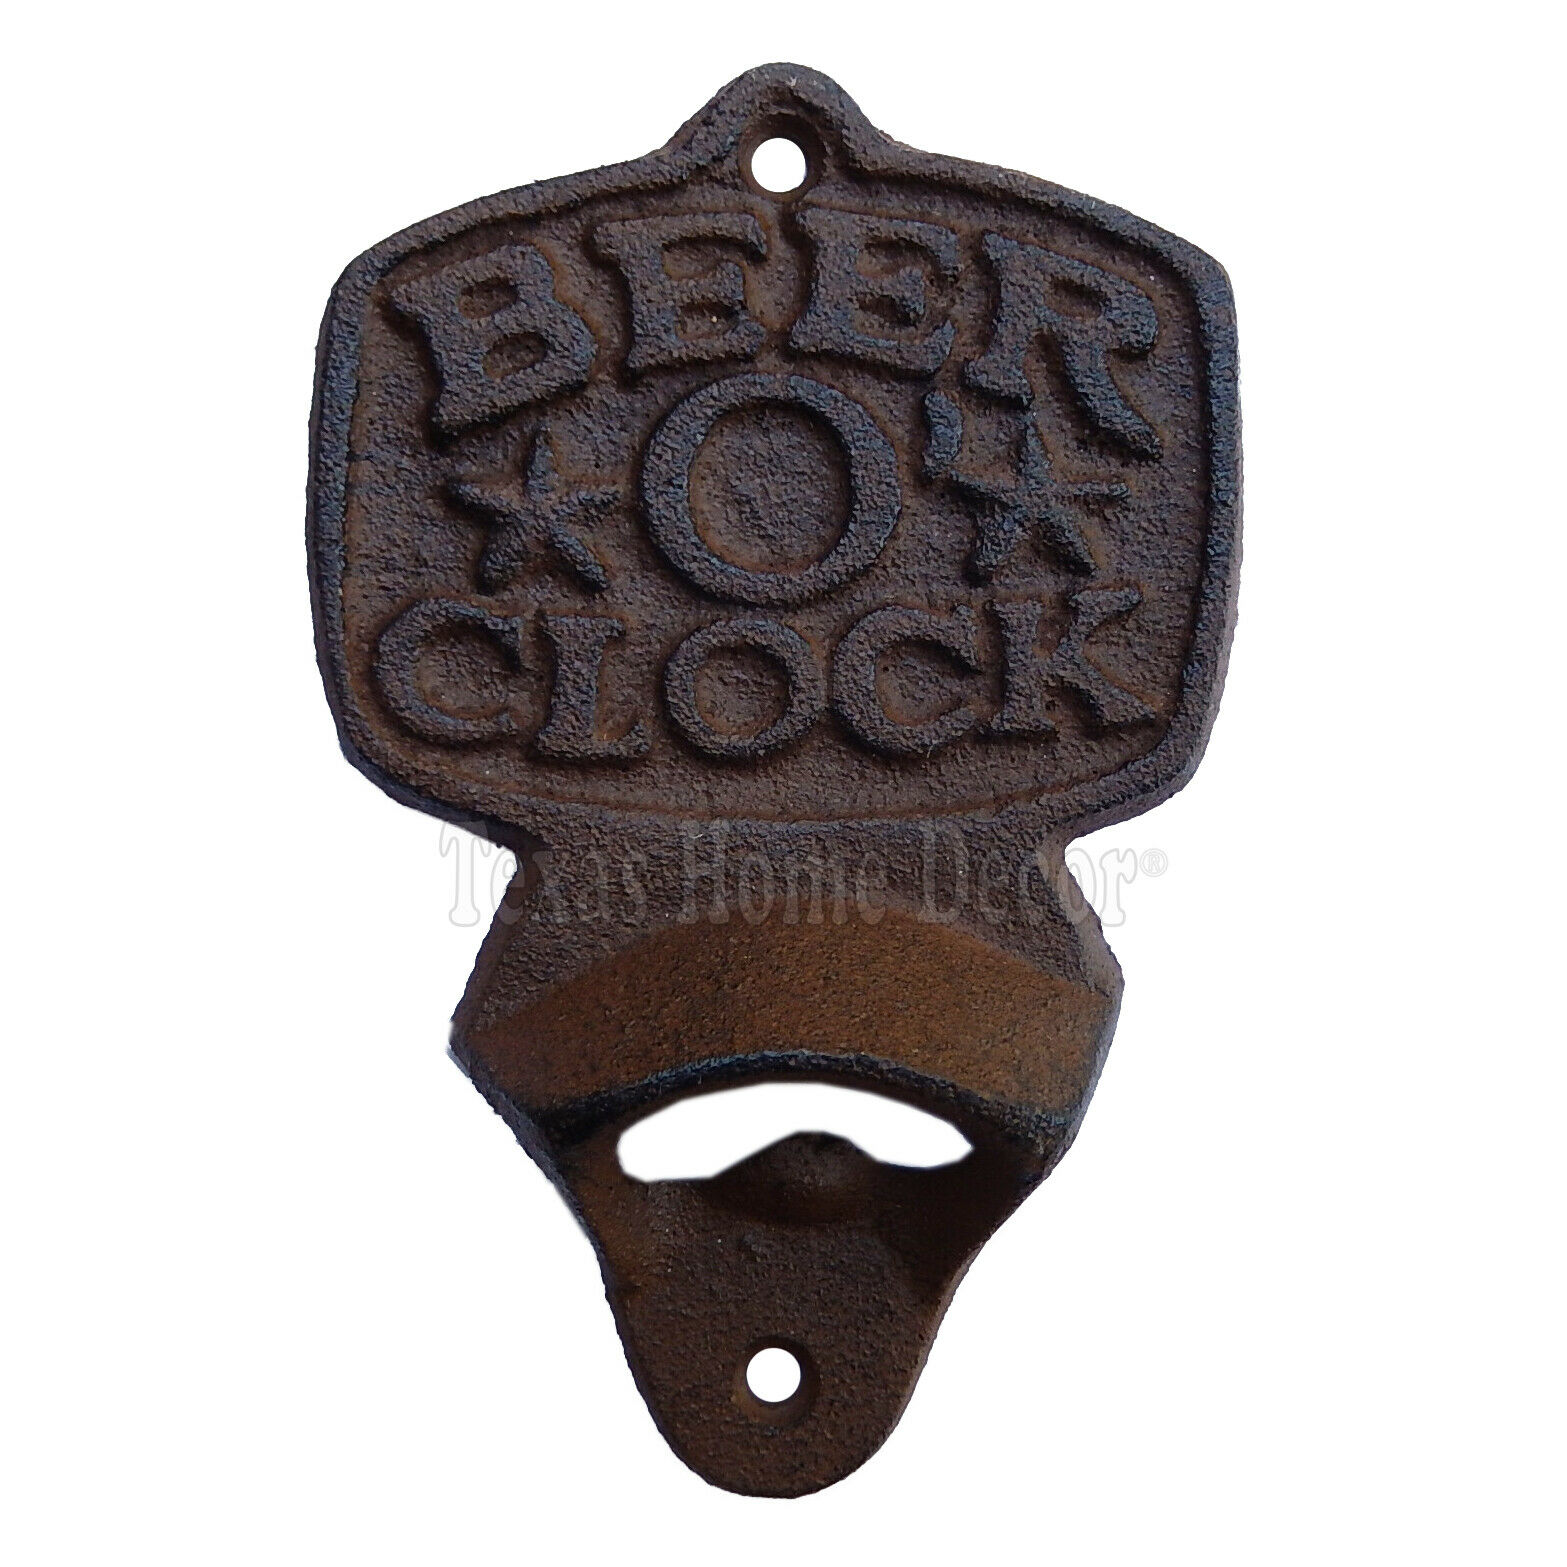 Beer O' Clock Beer Bottle Opener Rustic Cast Iron Wall Mounted Antique Style